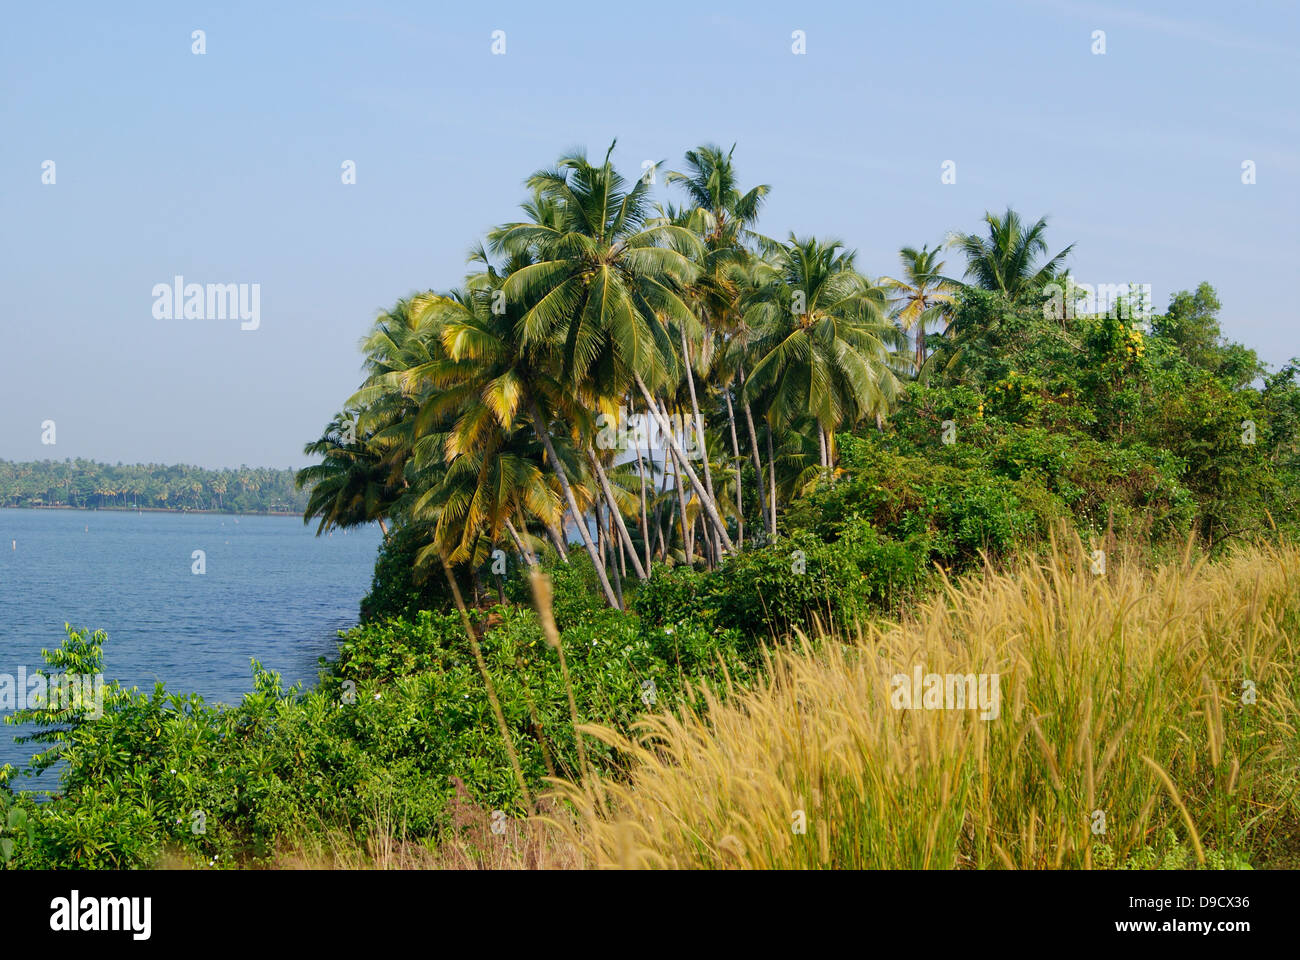 Coconut Palm Trees On The Shores Of Kerala Backwaters And Grass On